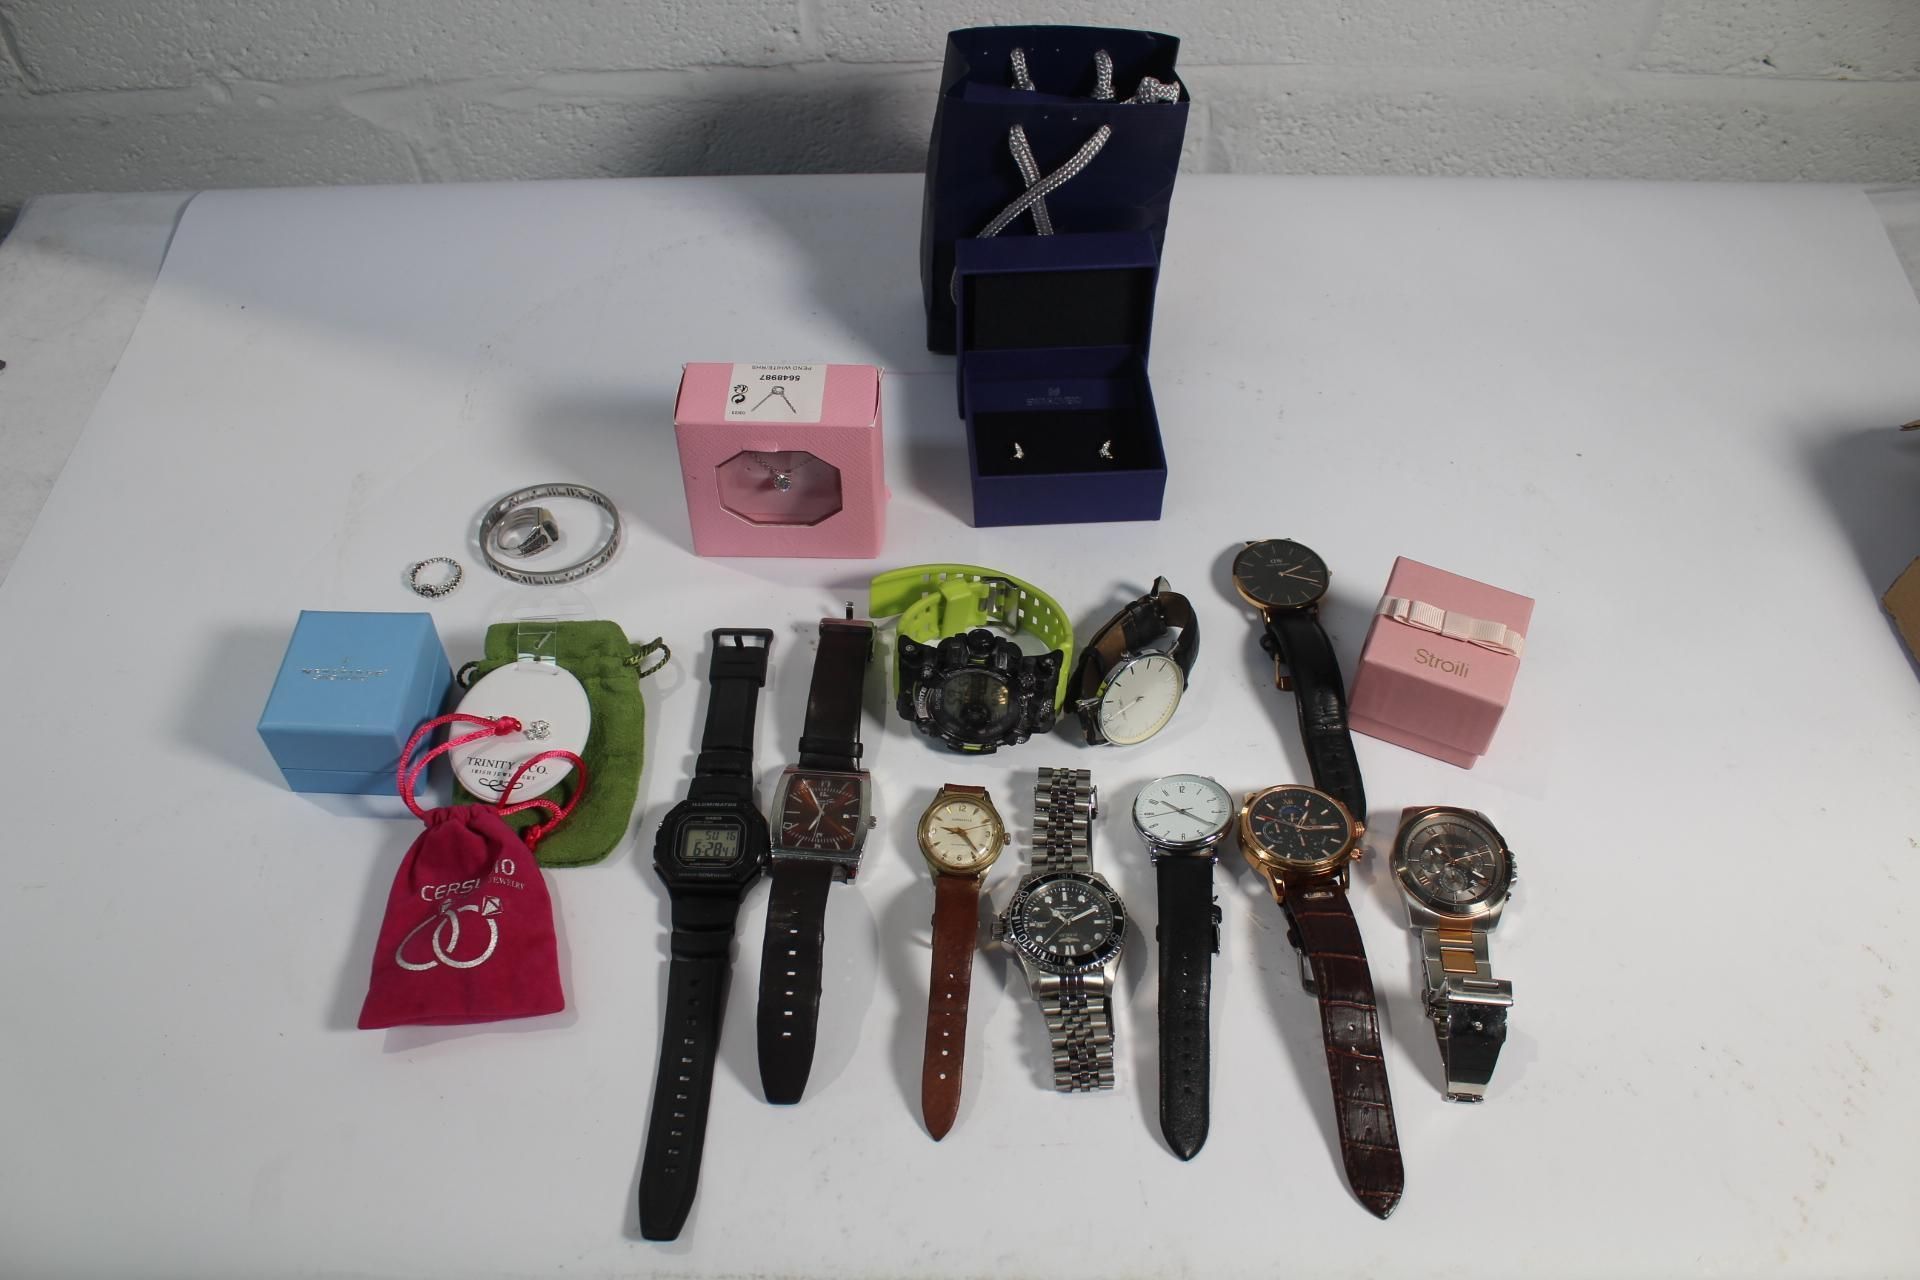 Assortment of Watches and Jewellery Accessories (Eighteen Items Total).